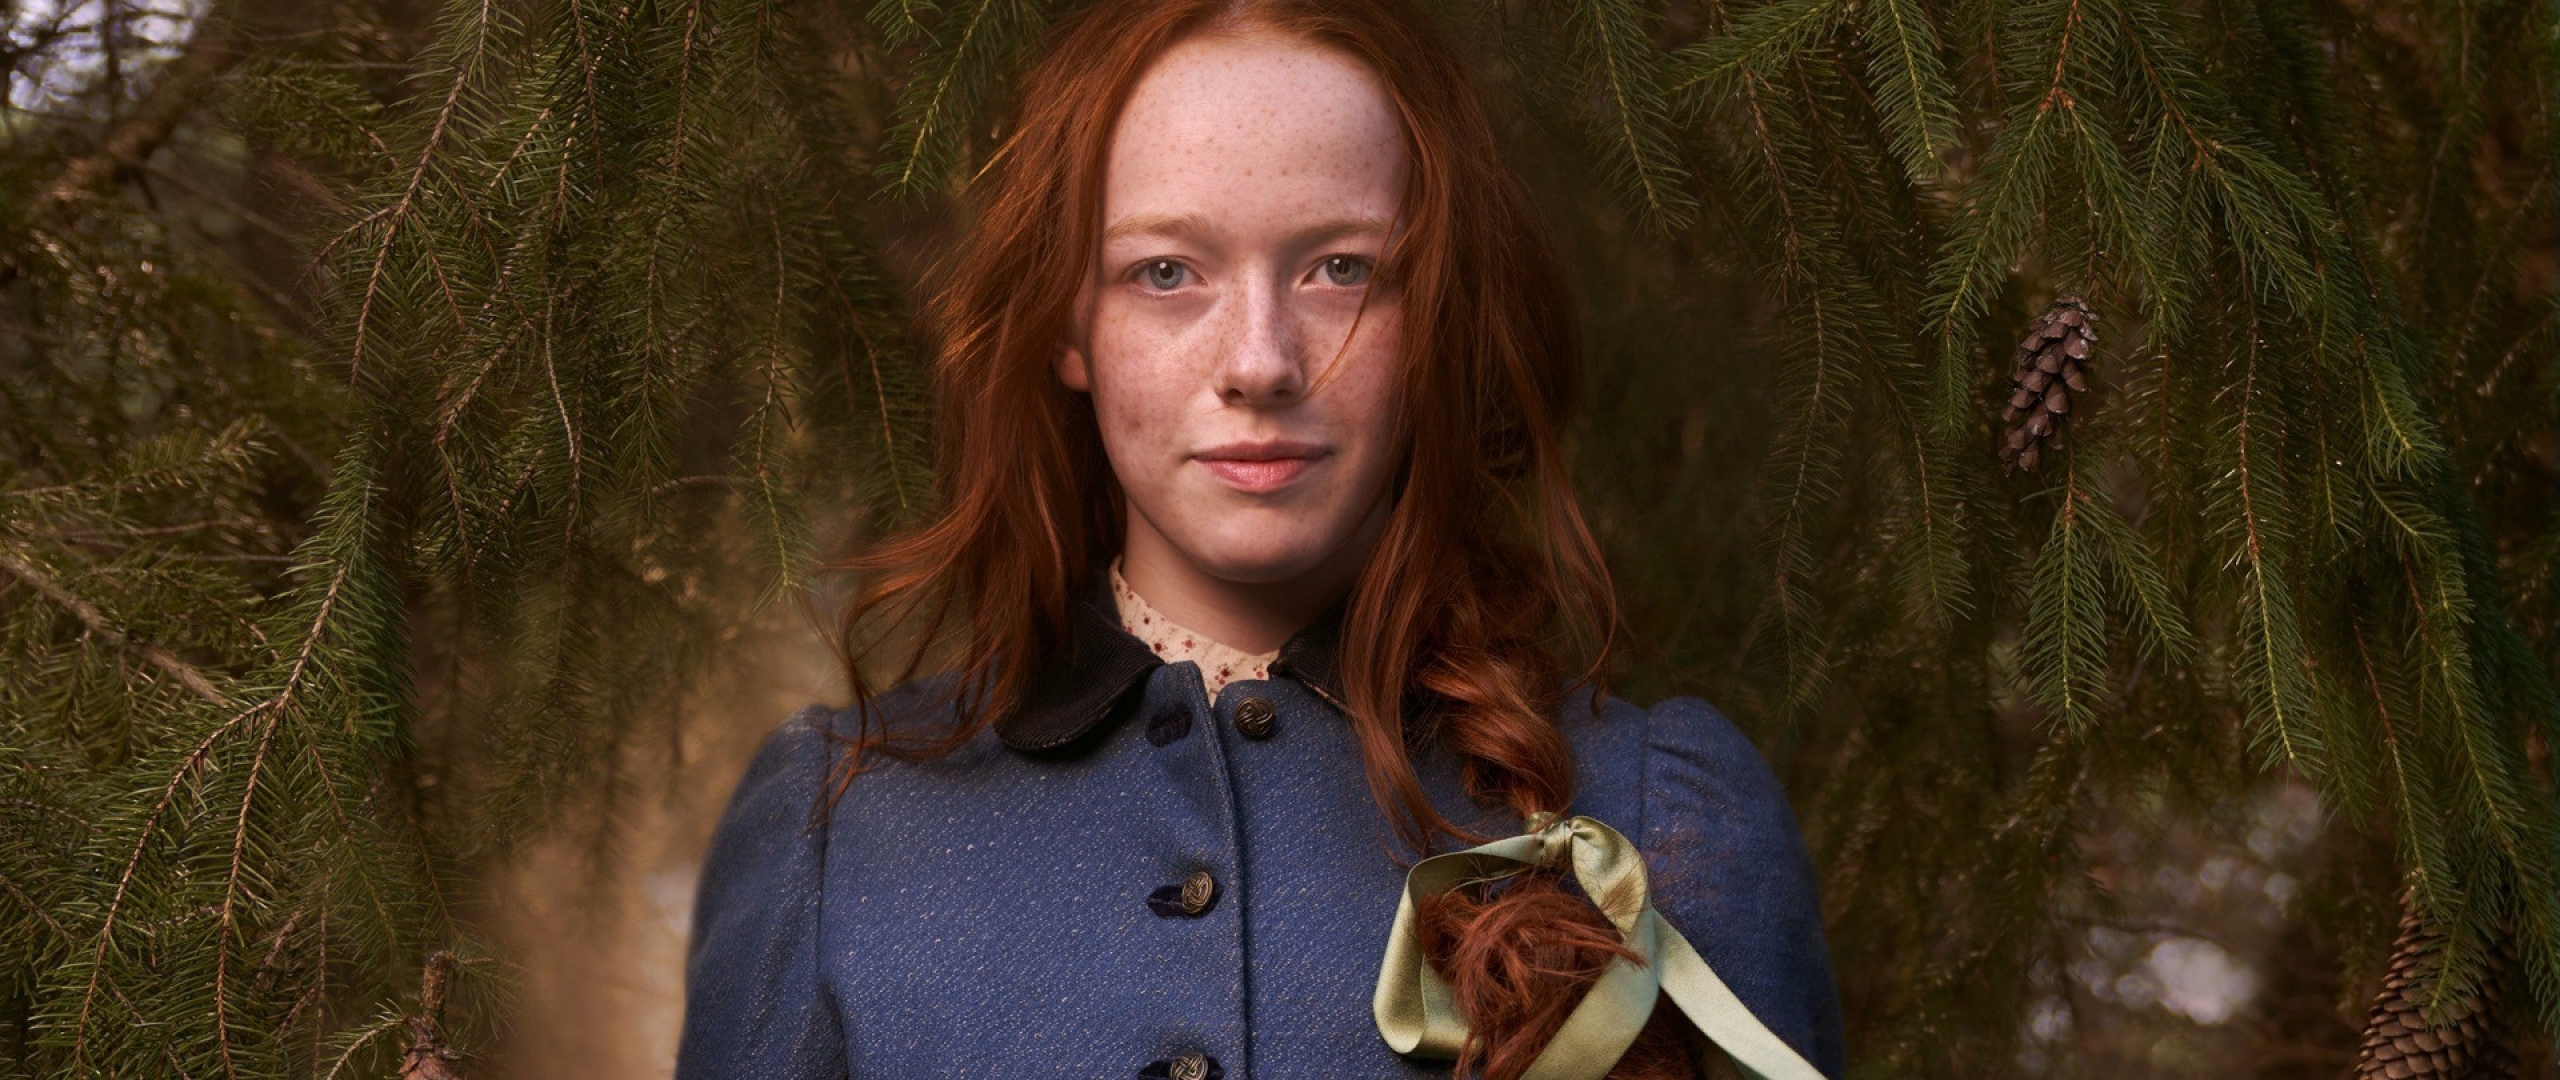 2560x1080 Amybeth McNulty in Anne with an E 2560x1080 Resolution ...